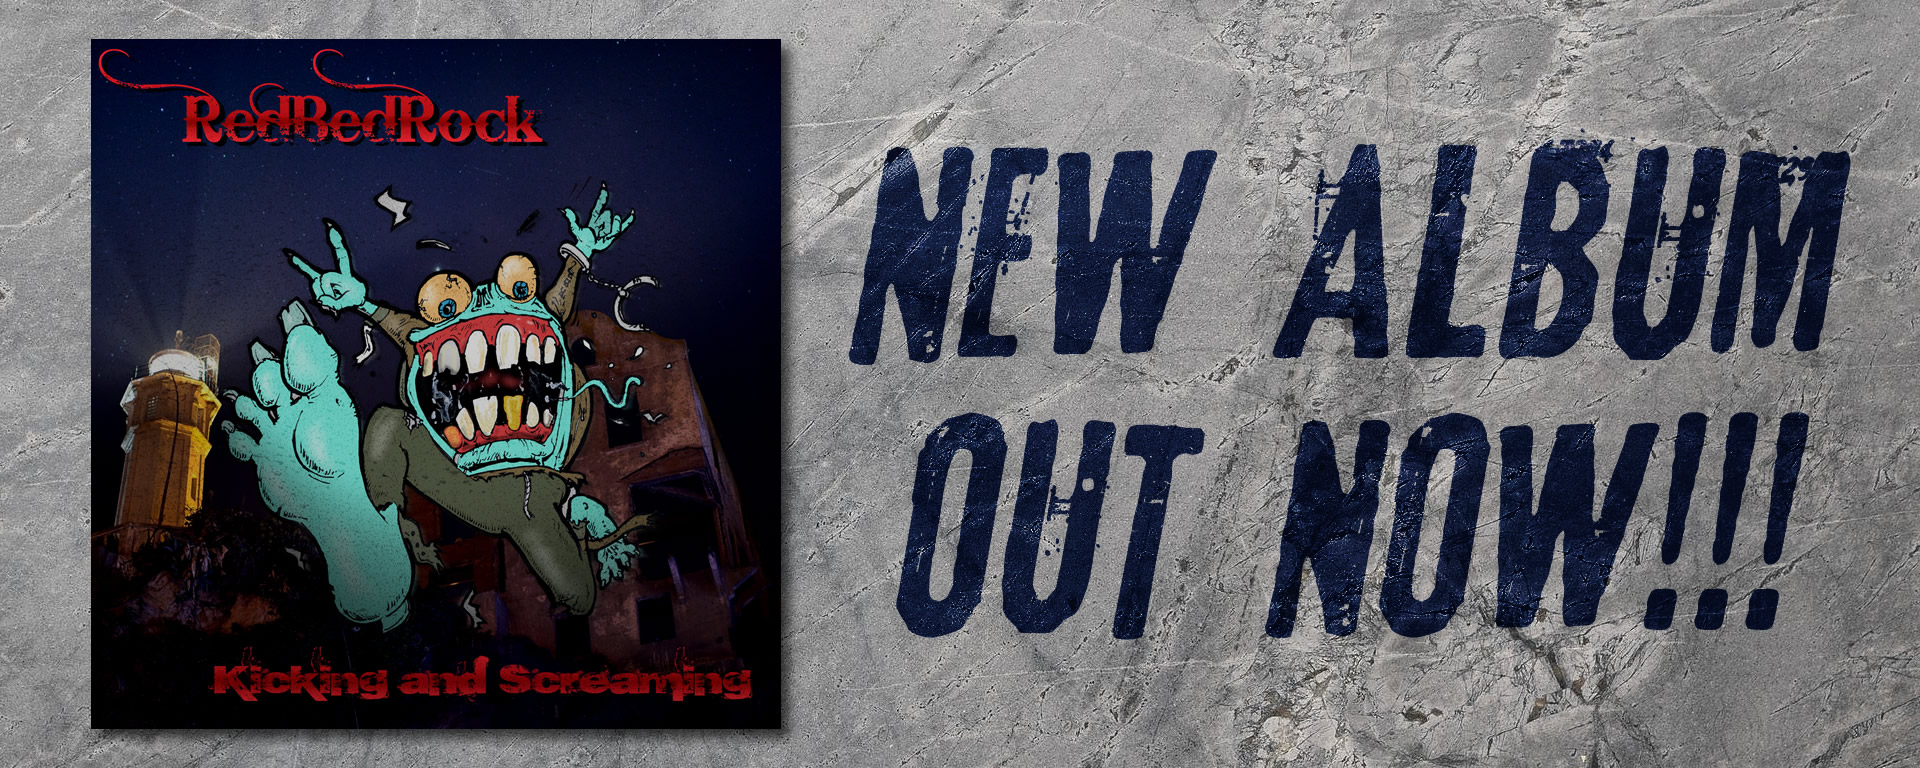 New album 'Kicking and Screaming' out Now!